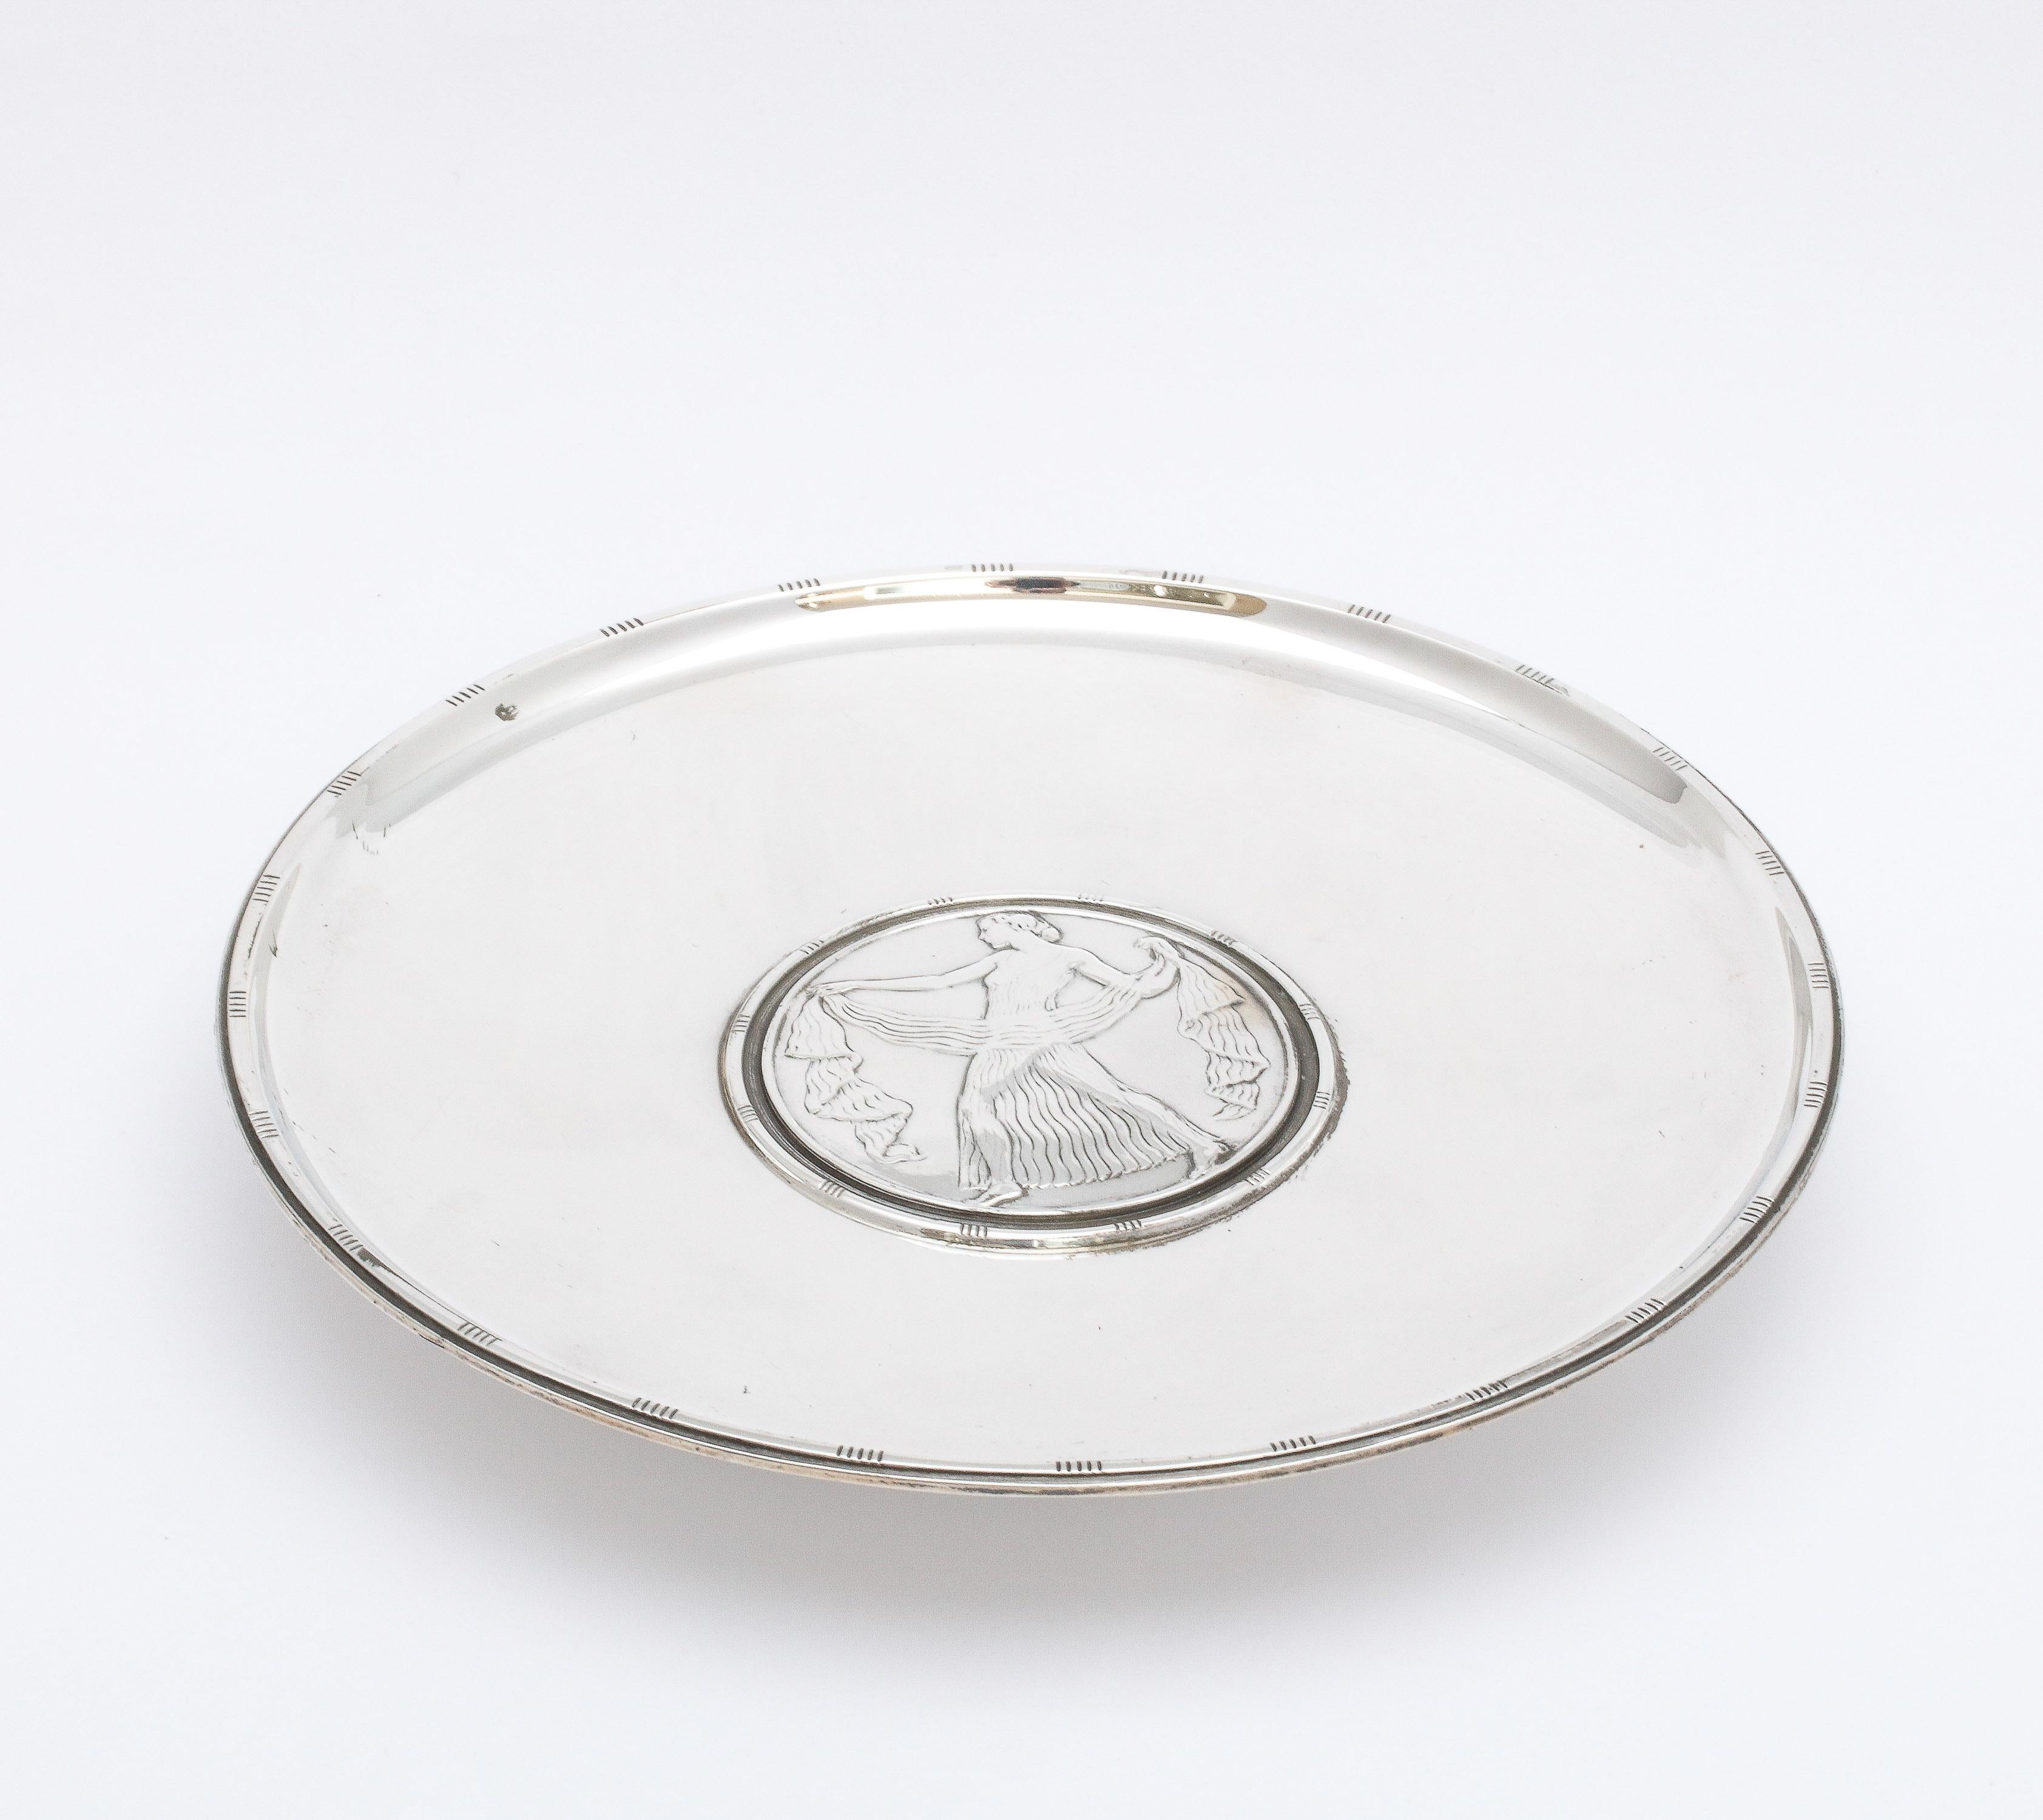 Unusual, Art Deco, sterling silver round serving platter on pedestal base, Tiffany and Co., New York, year-inventory marked for 1924-1925. Designed with an Art Deco figure in the center of the platter. Measures 7 inches diameter x 1 inch high.